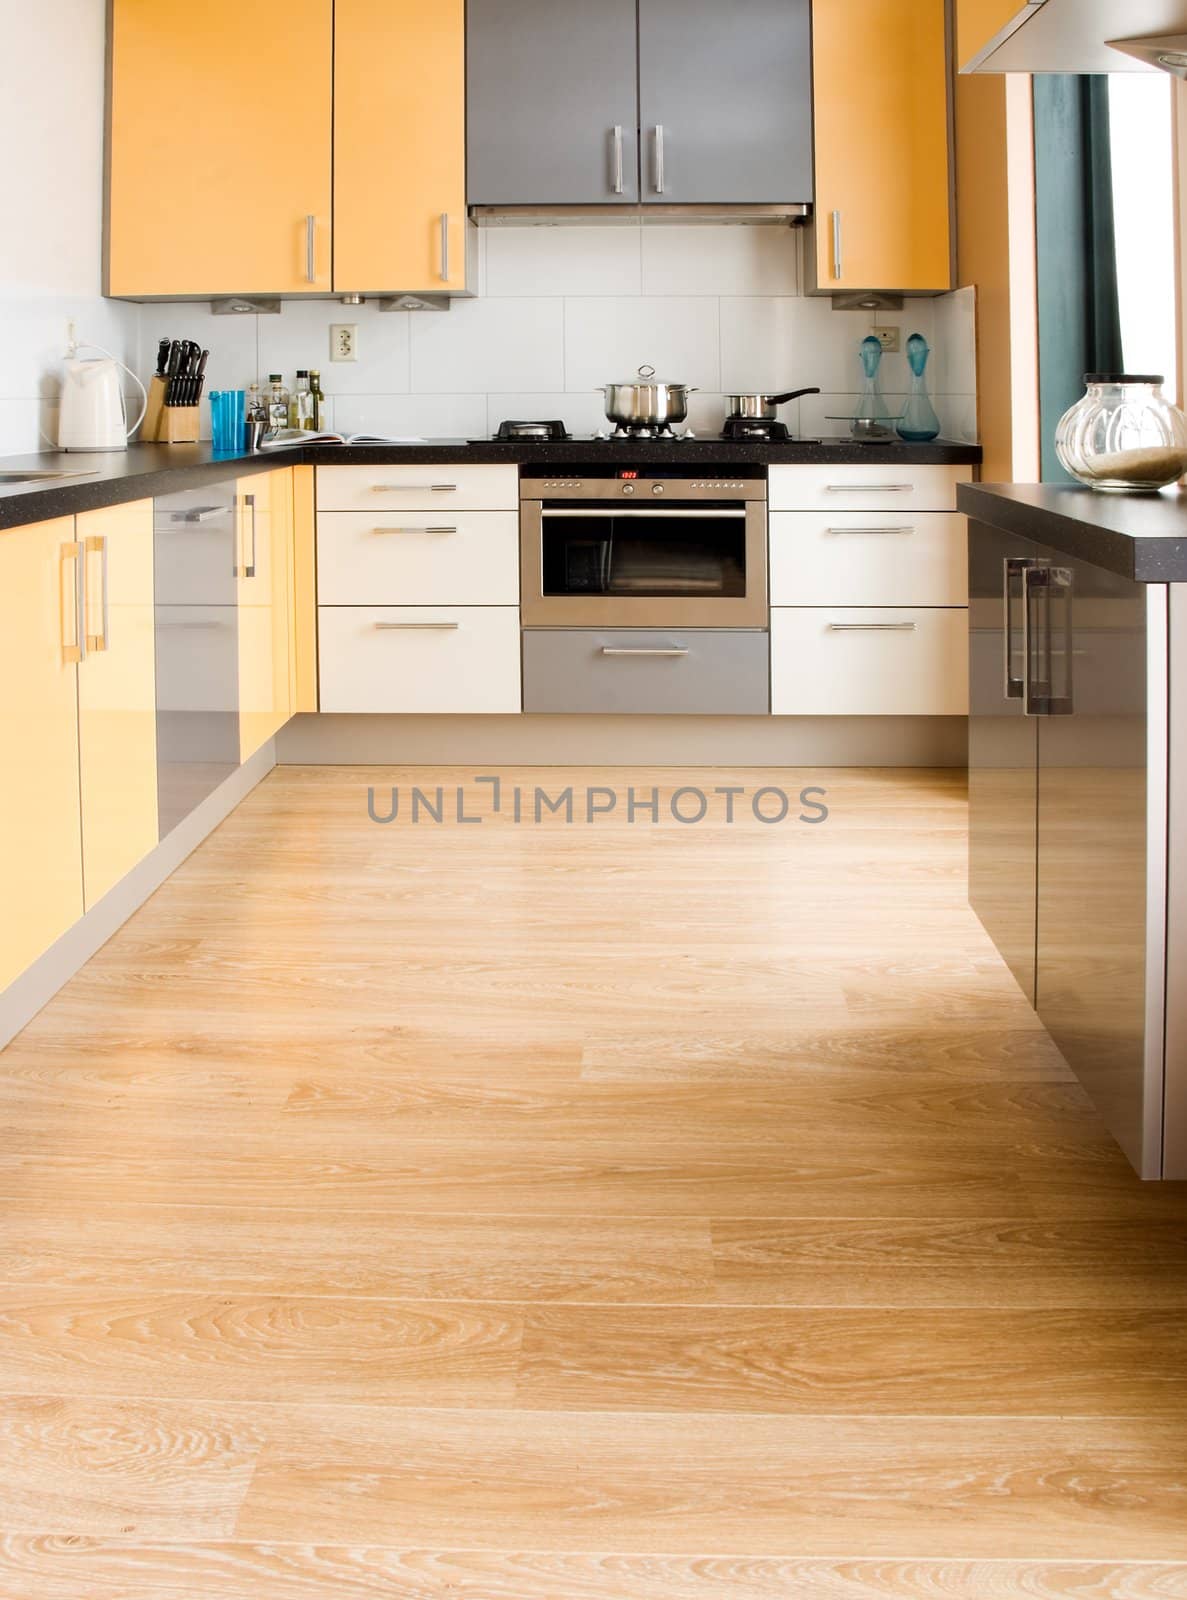 View into colorful modern kitchen in black, yellow and grey with wooden floor - vertical